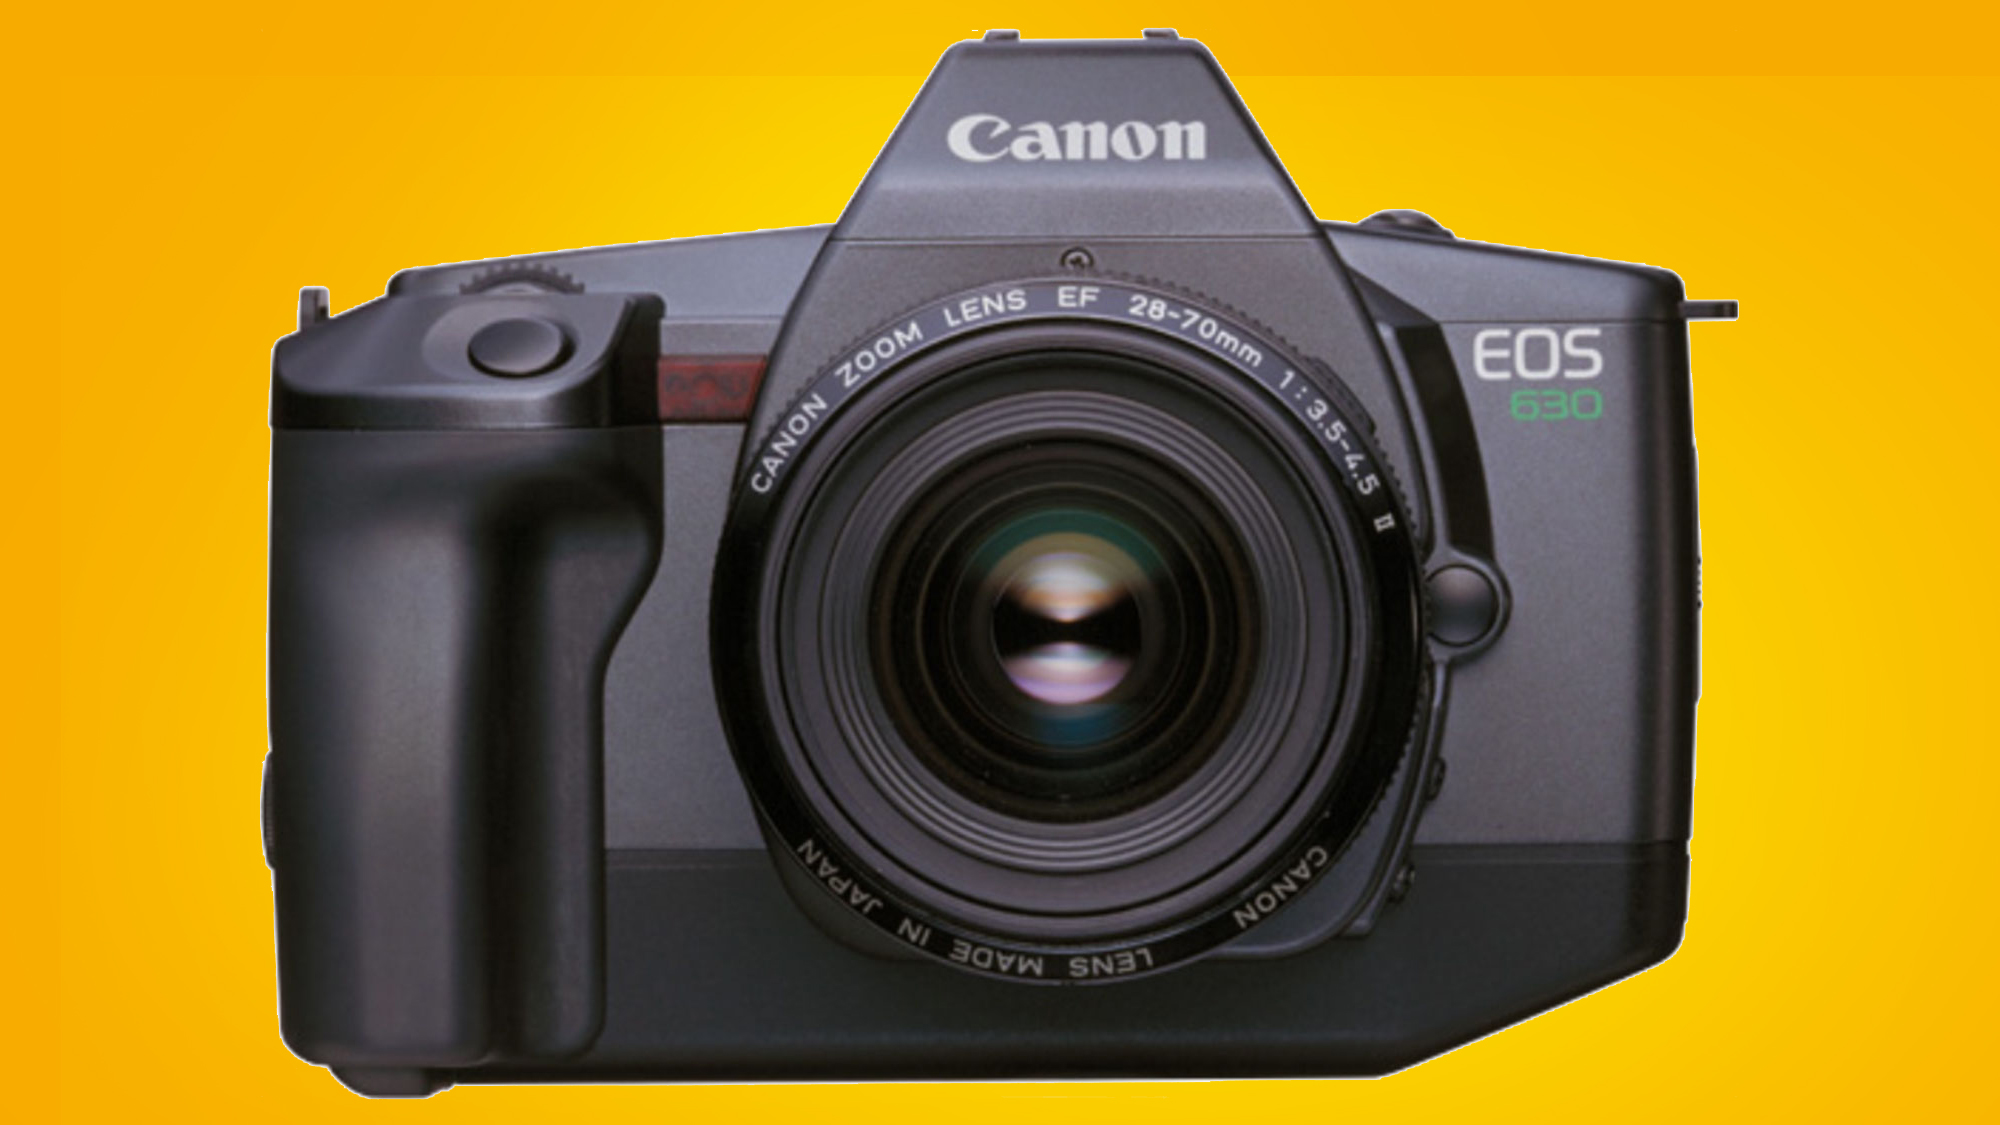 The Canon EOS 630 on an orange background